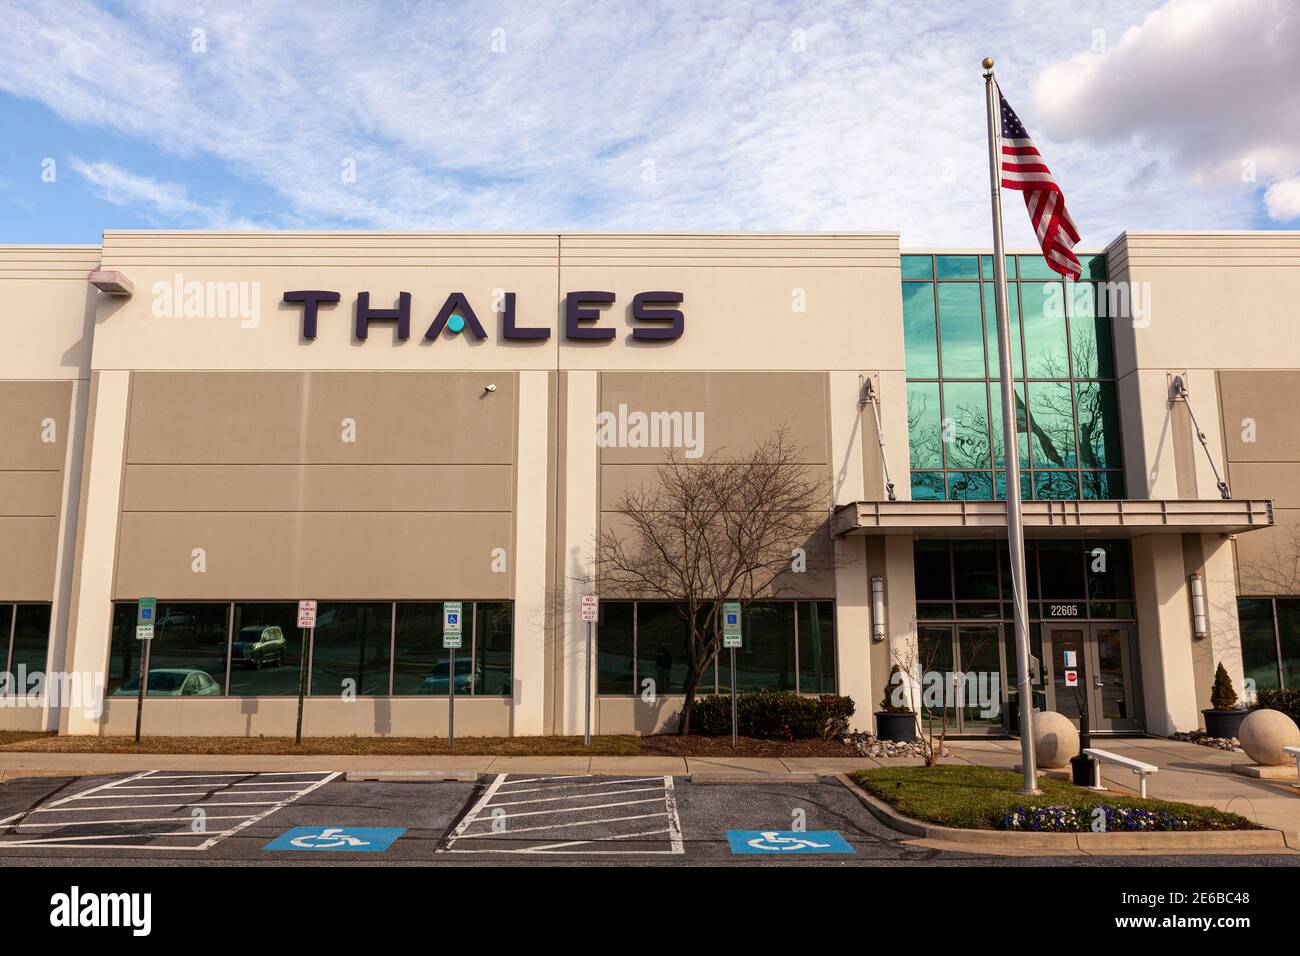 Clarksburg, MD, USA 01-22-2021: US Headquarters of French defense, security and aerospace company Thales Group. They produce high tech military and ci Stock Photo